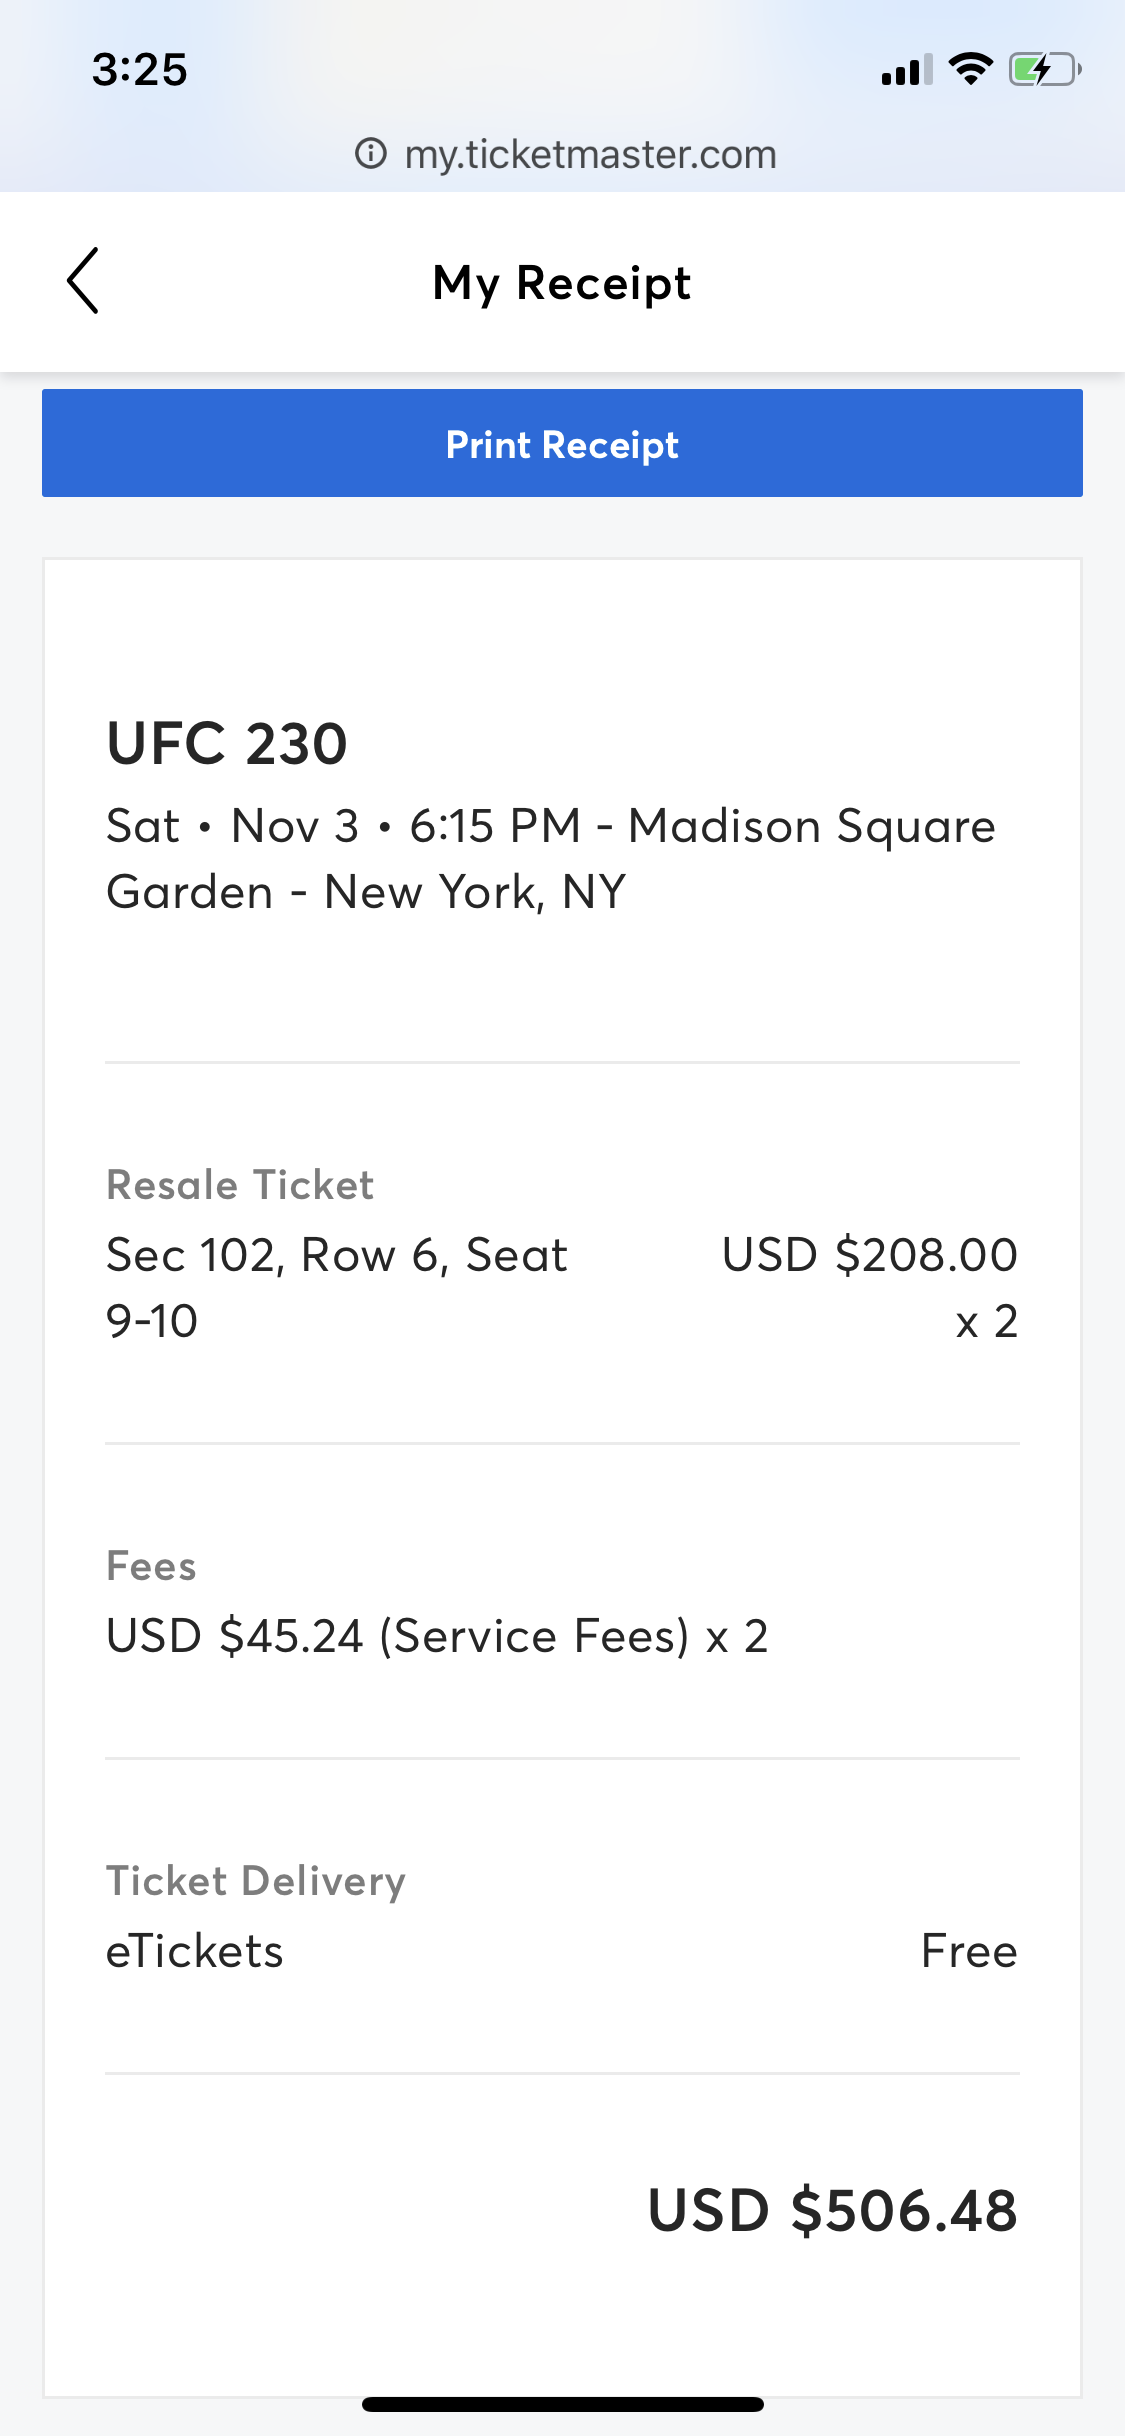 PROOF OF MY own  purchase from ticketmaster